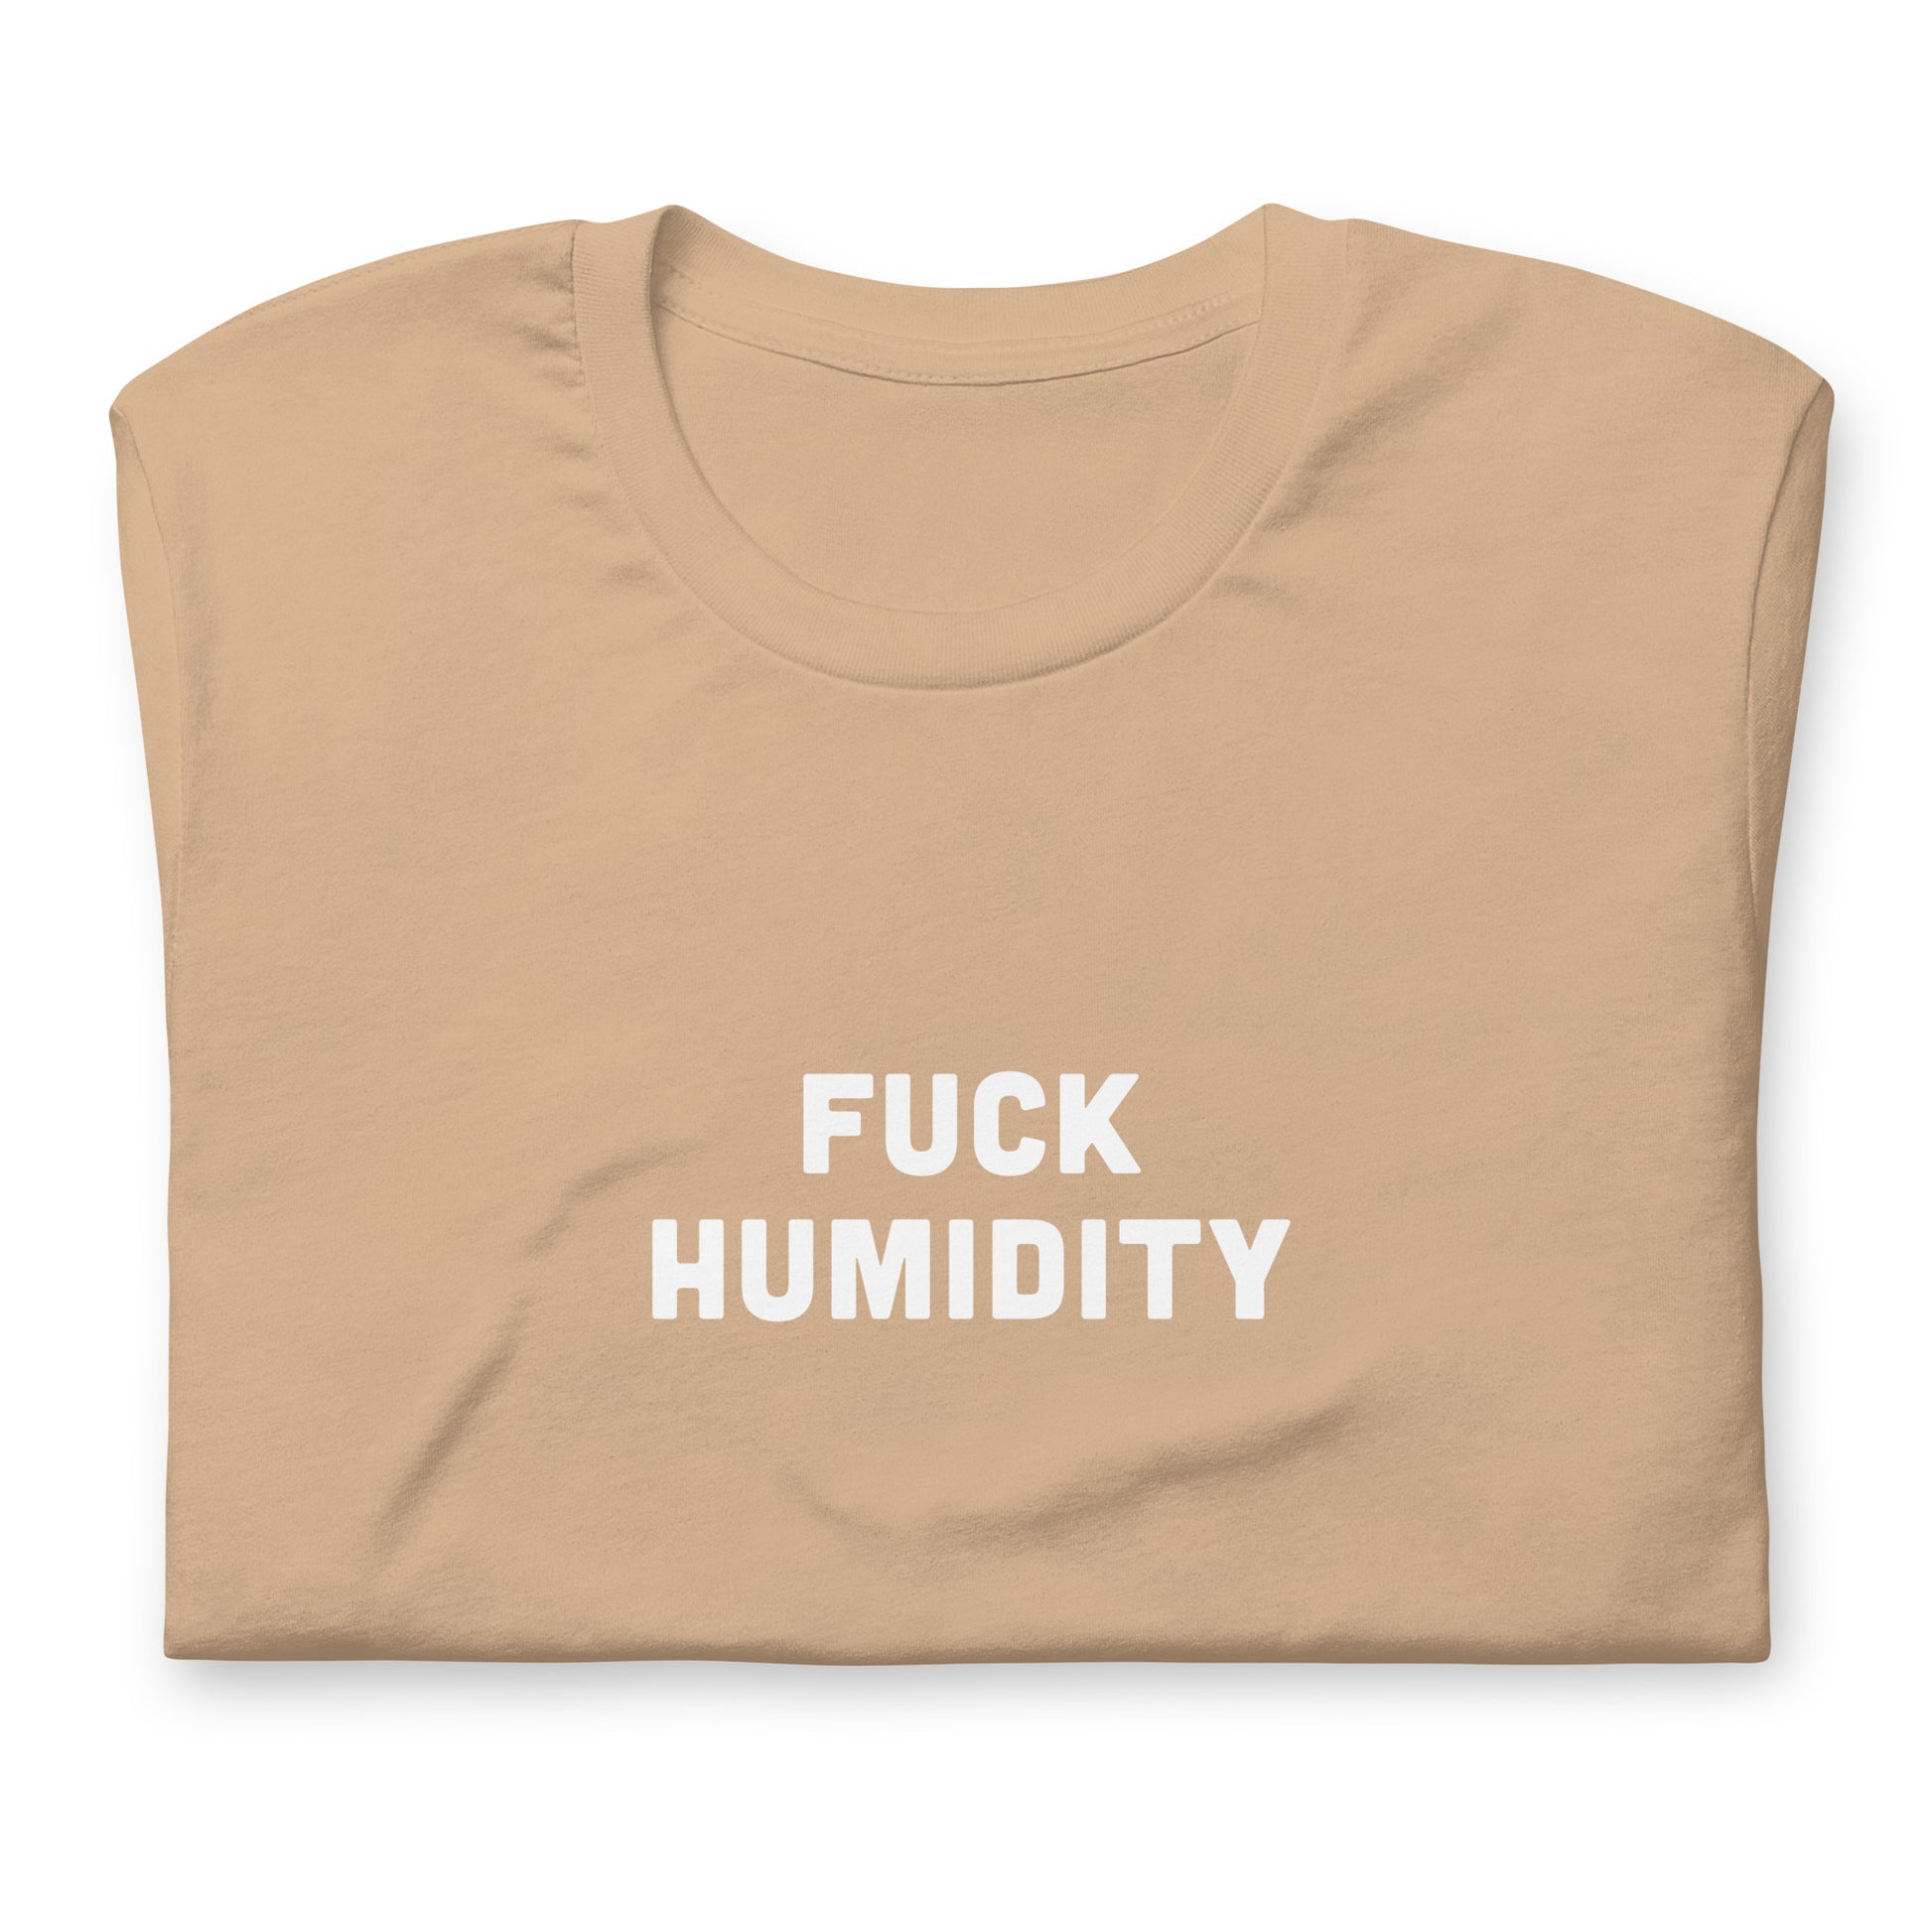 Fuck Humidity T-Shirt Size XL Color Forest